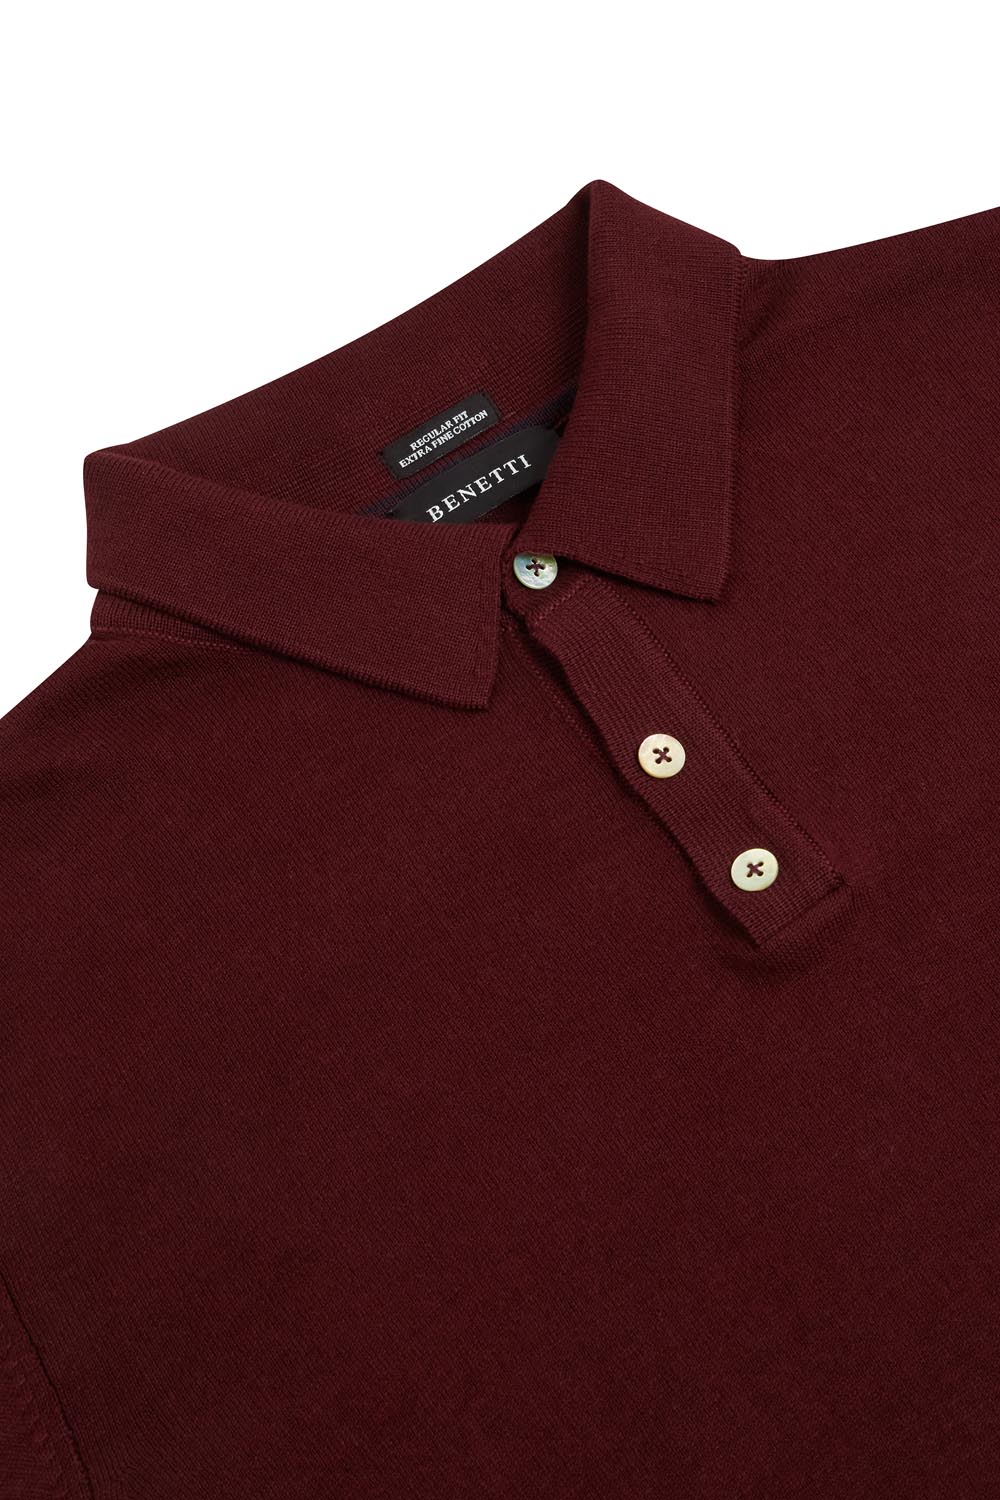 Geron Bordo Buttoned Sweater - Tom Murphy's Formal and Menswear